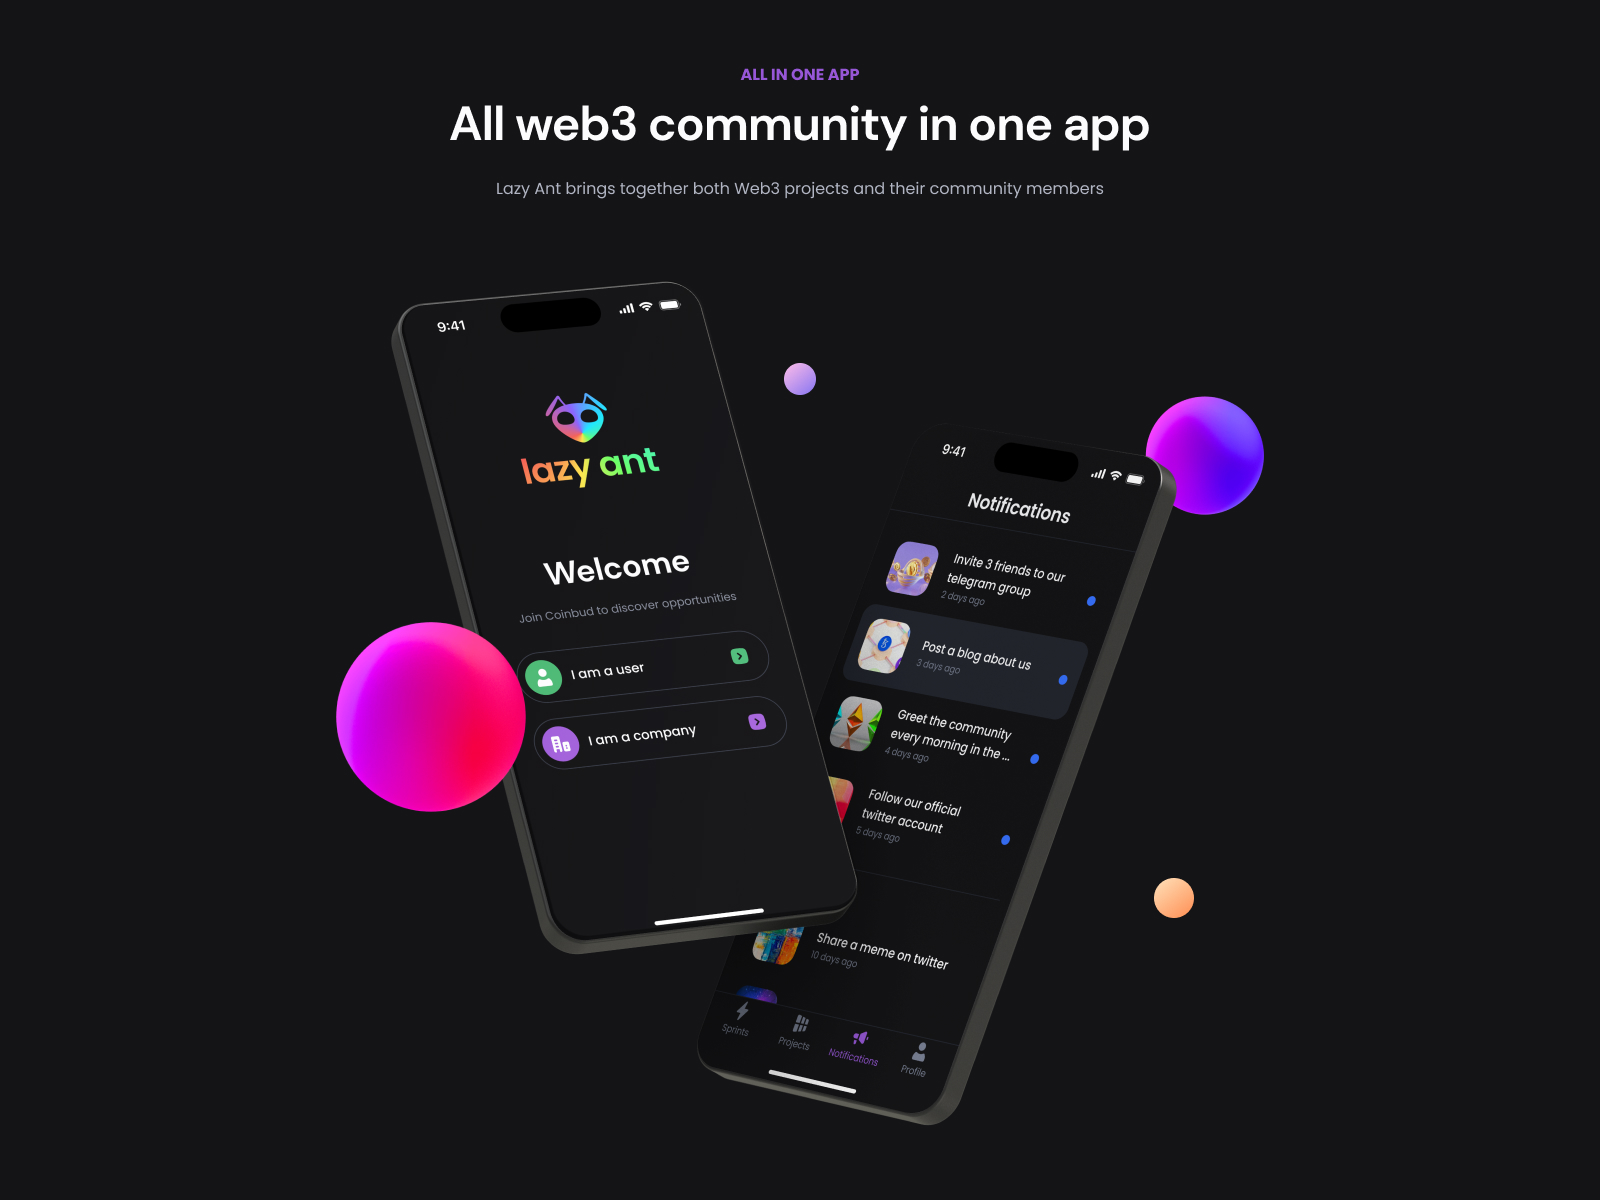 All web3 community in one app